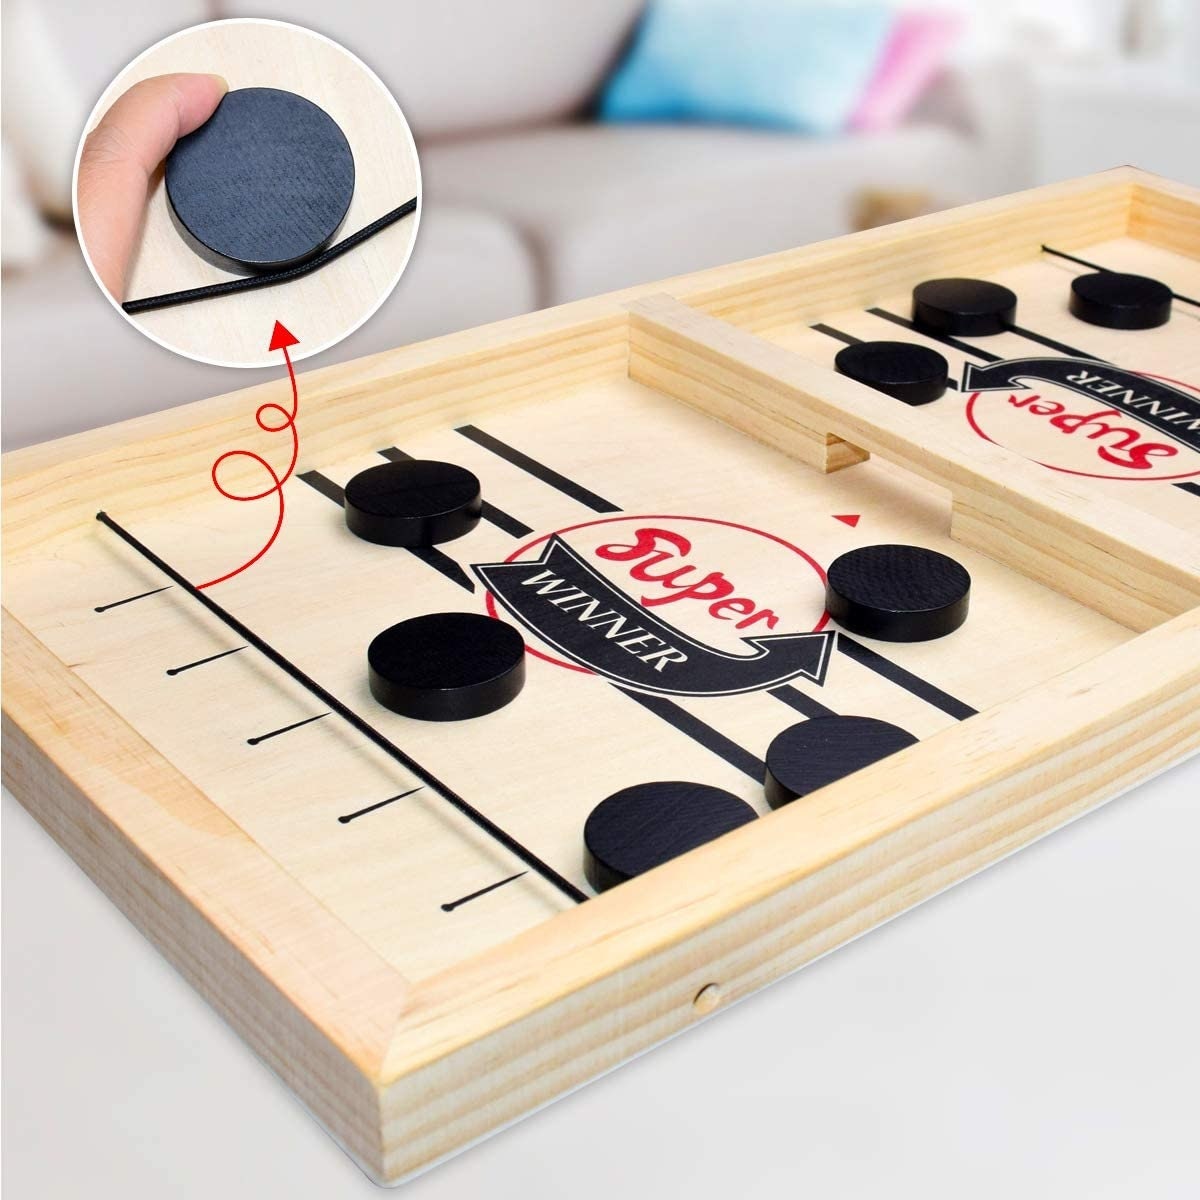 Sling Puck Board Game I Table Top Puck Table Game I Wooden Family Games,  Fast Sling Puck Game, Football Slingshot Game I Table Top Hockey Game for